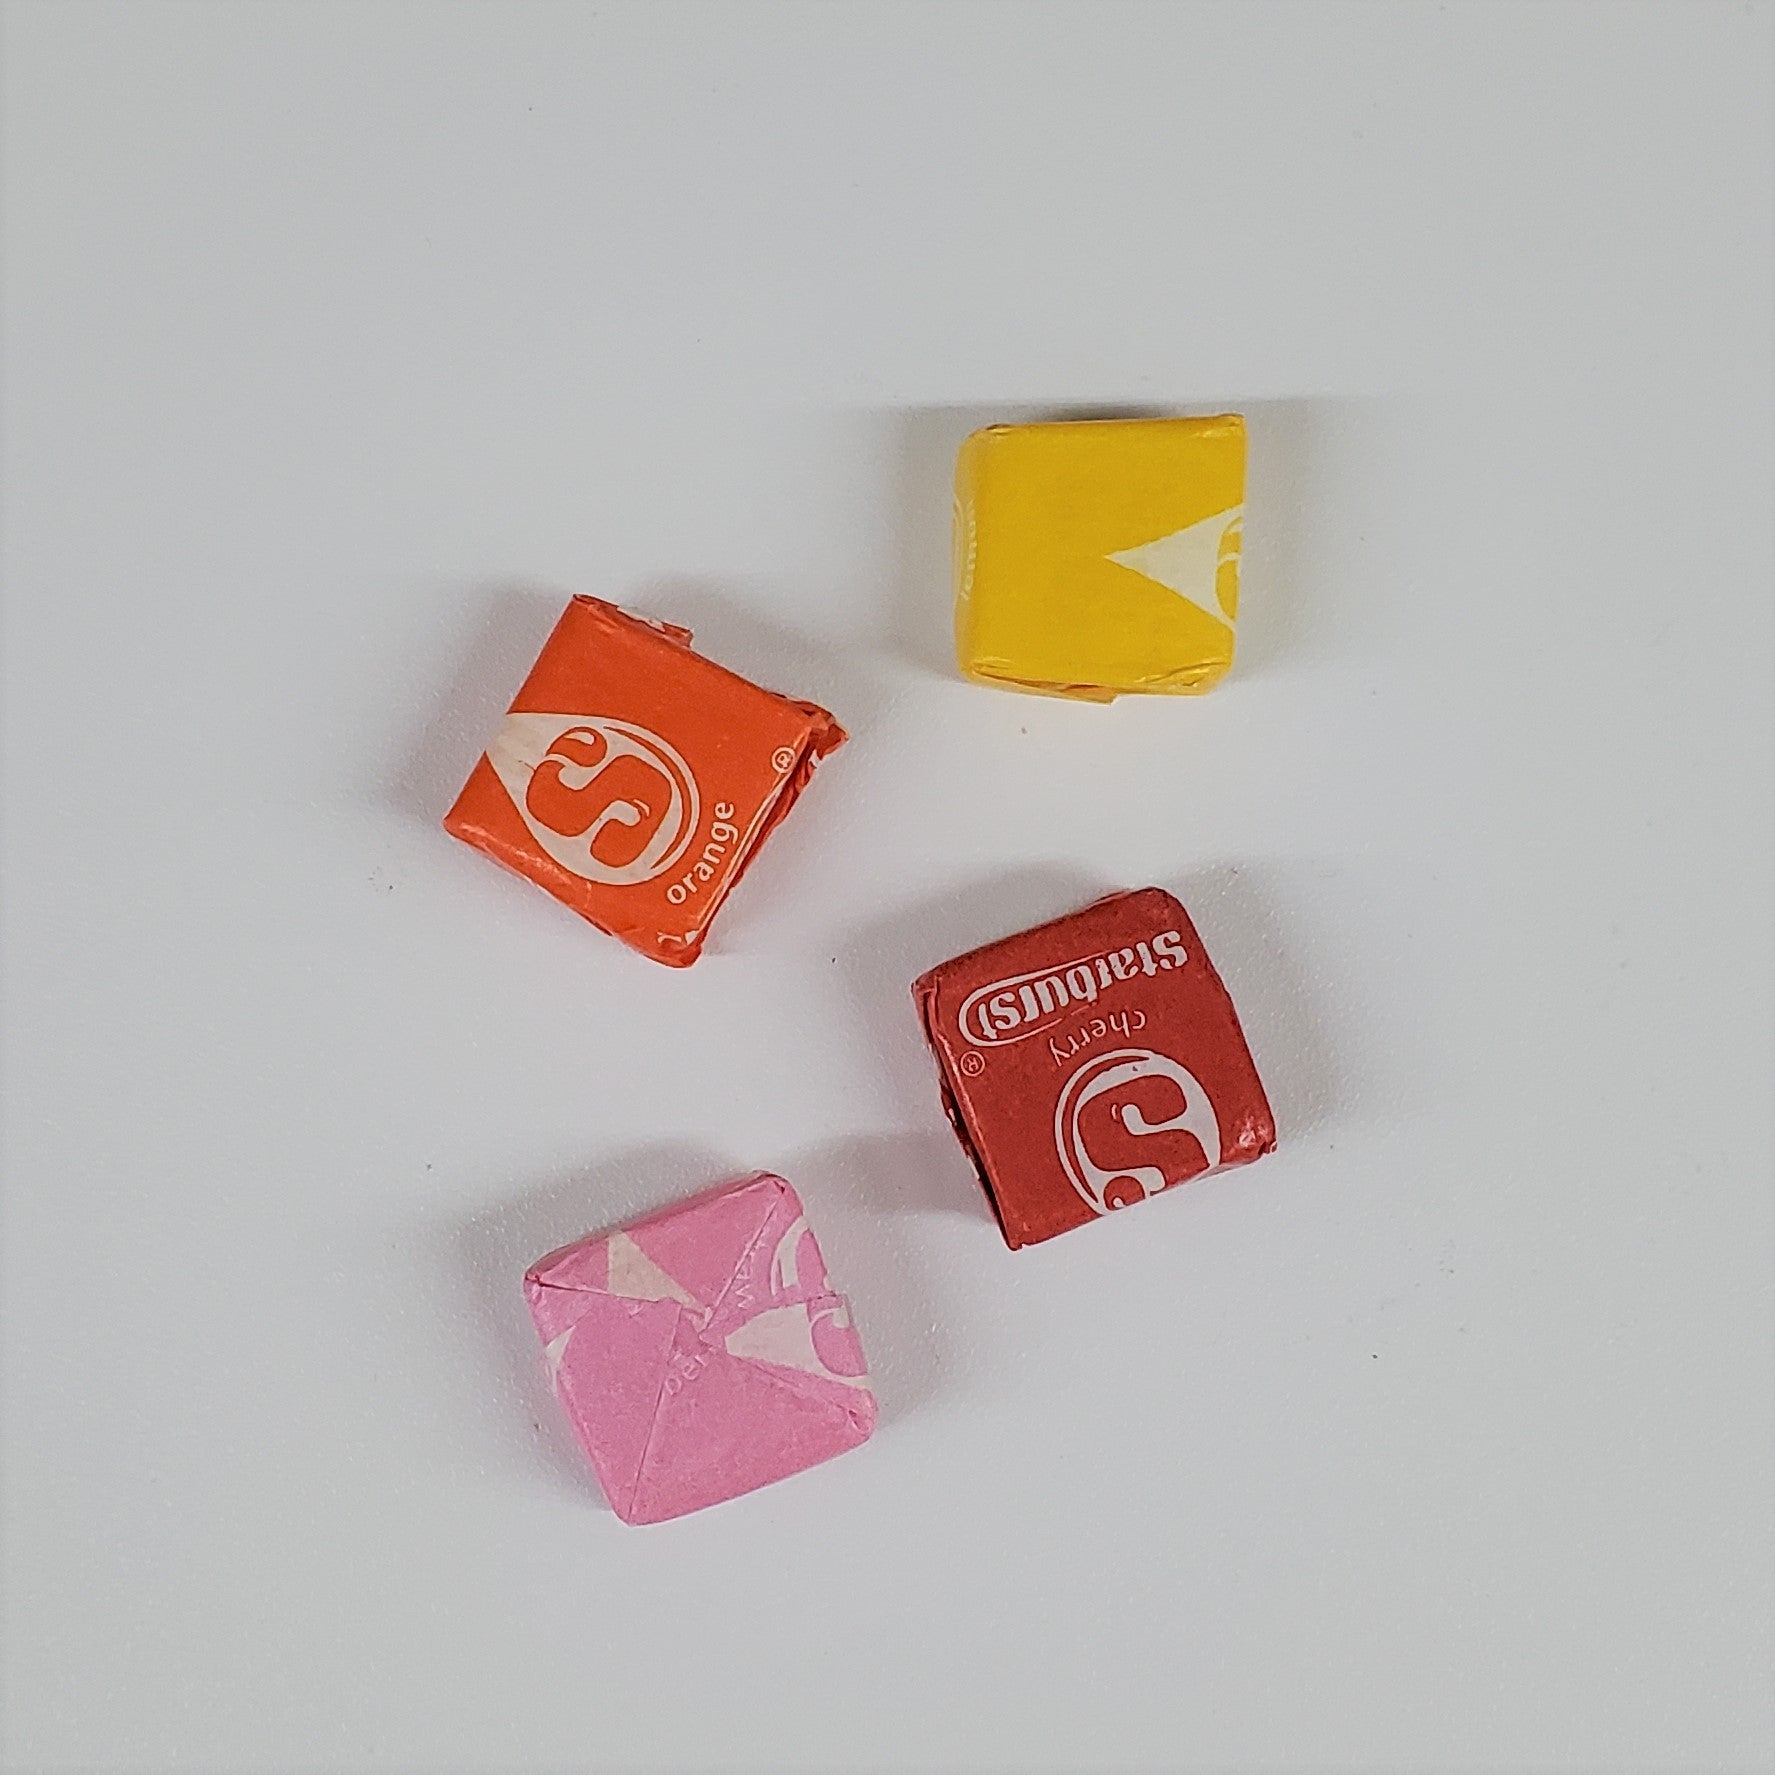 Starburst original fruit chews available at Stage Stop Candy